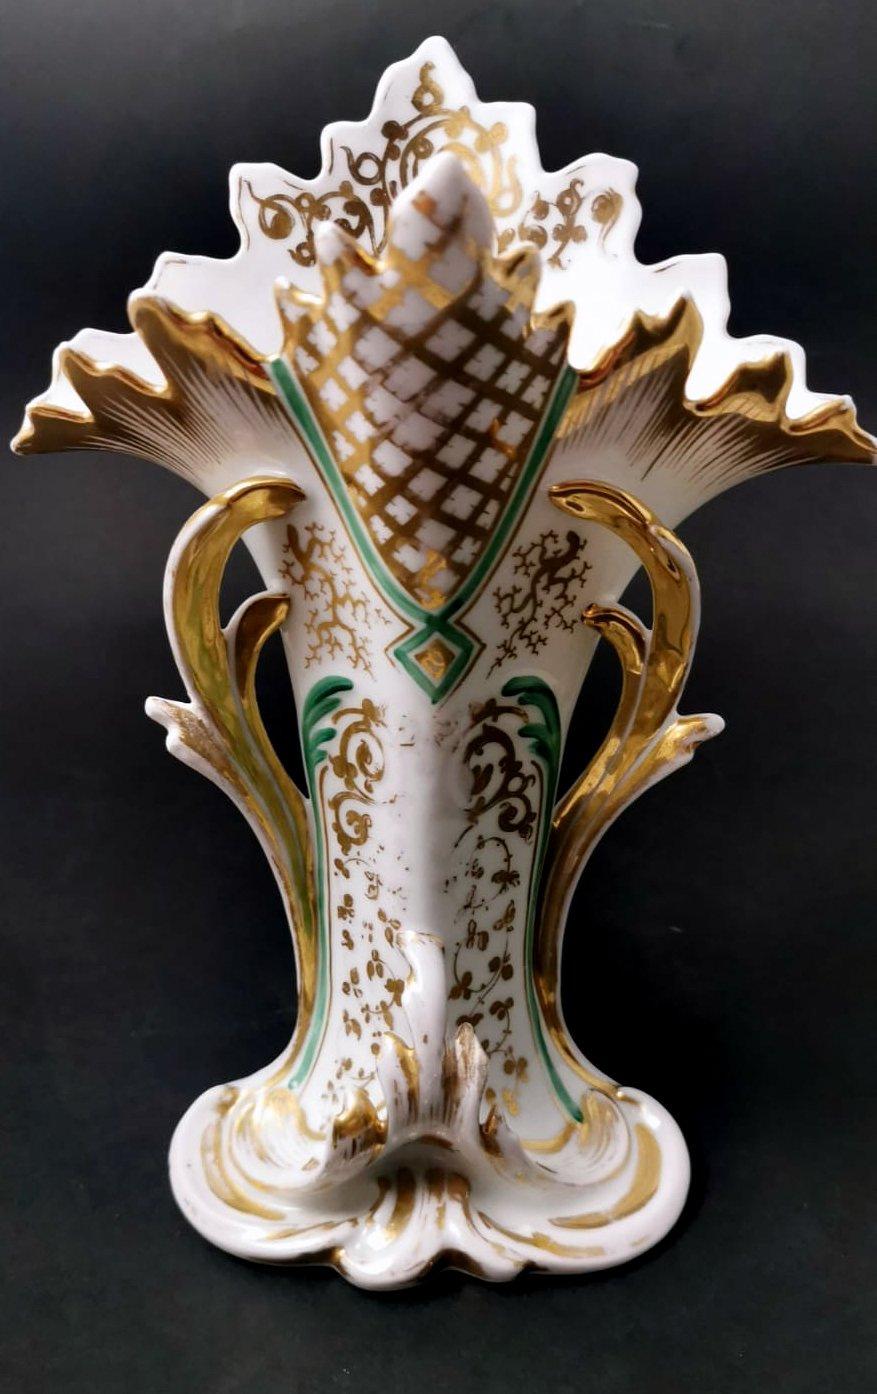 We kindly suggest that you read the entire description, as we try to give you detailed technical and historical information to guarantee the authenticity of our objects.
A rare and romantic French wedding vase is made of white porcelain; the entire